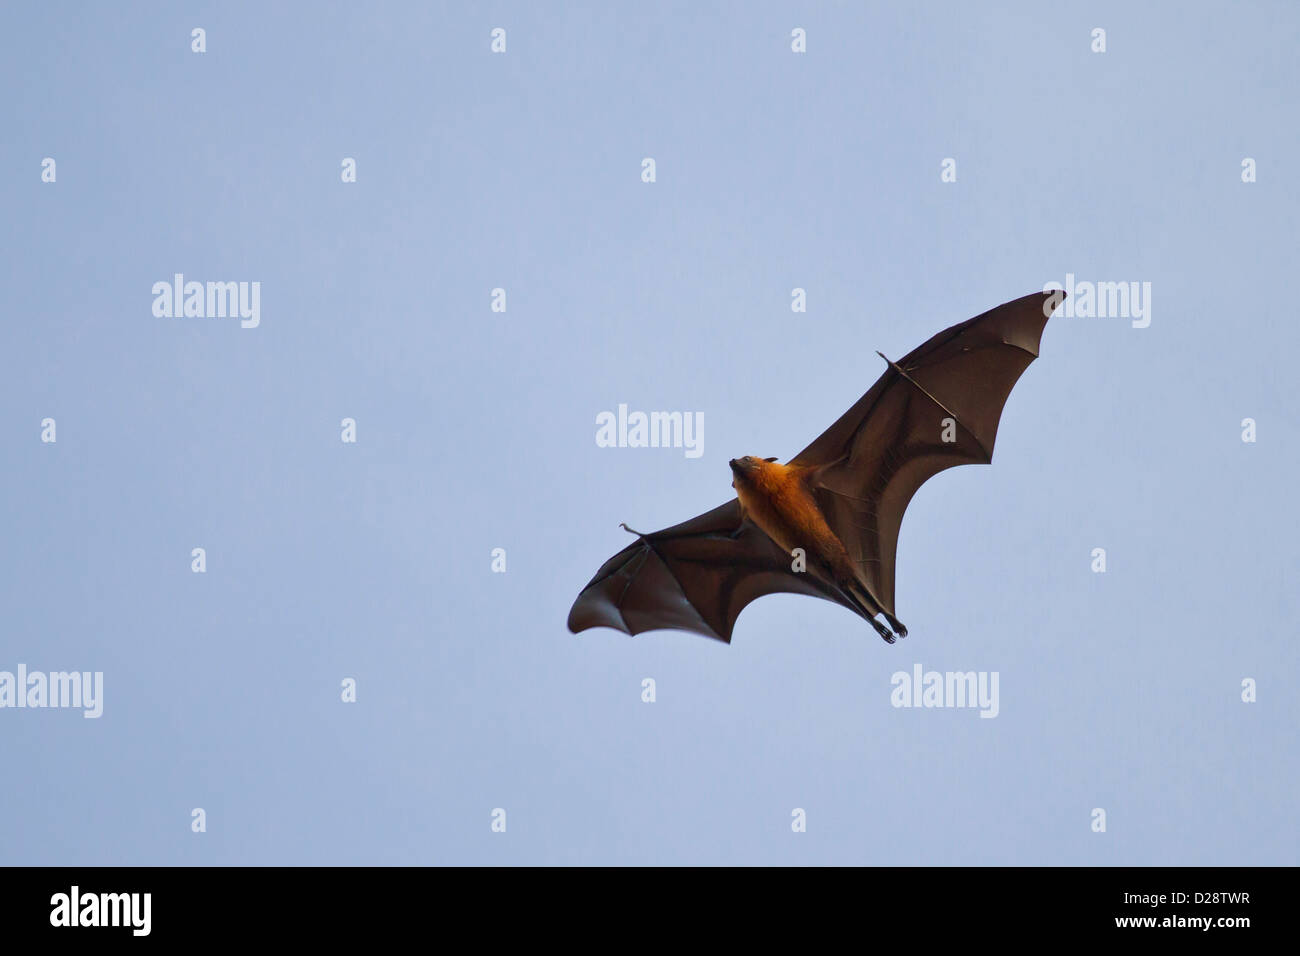 lugfuechse flying dog flying foxes Stock Photo